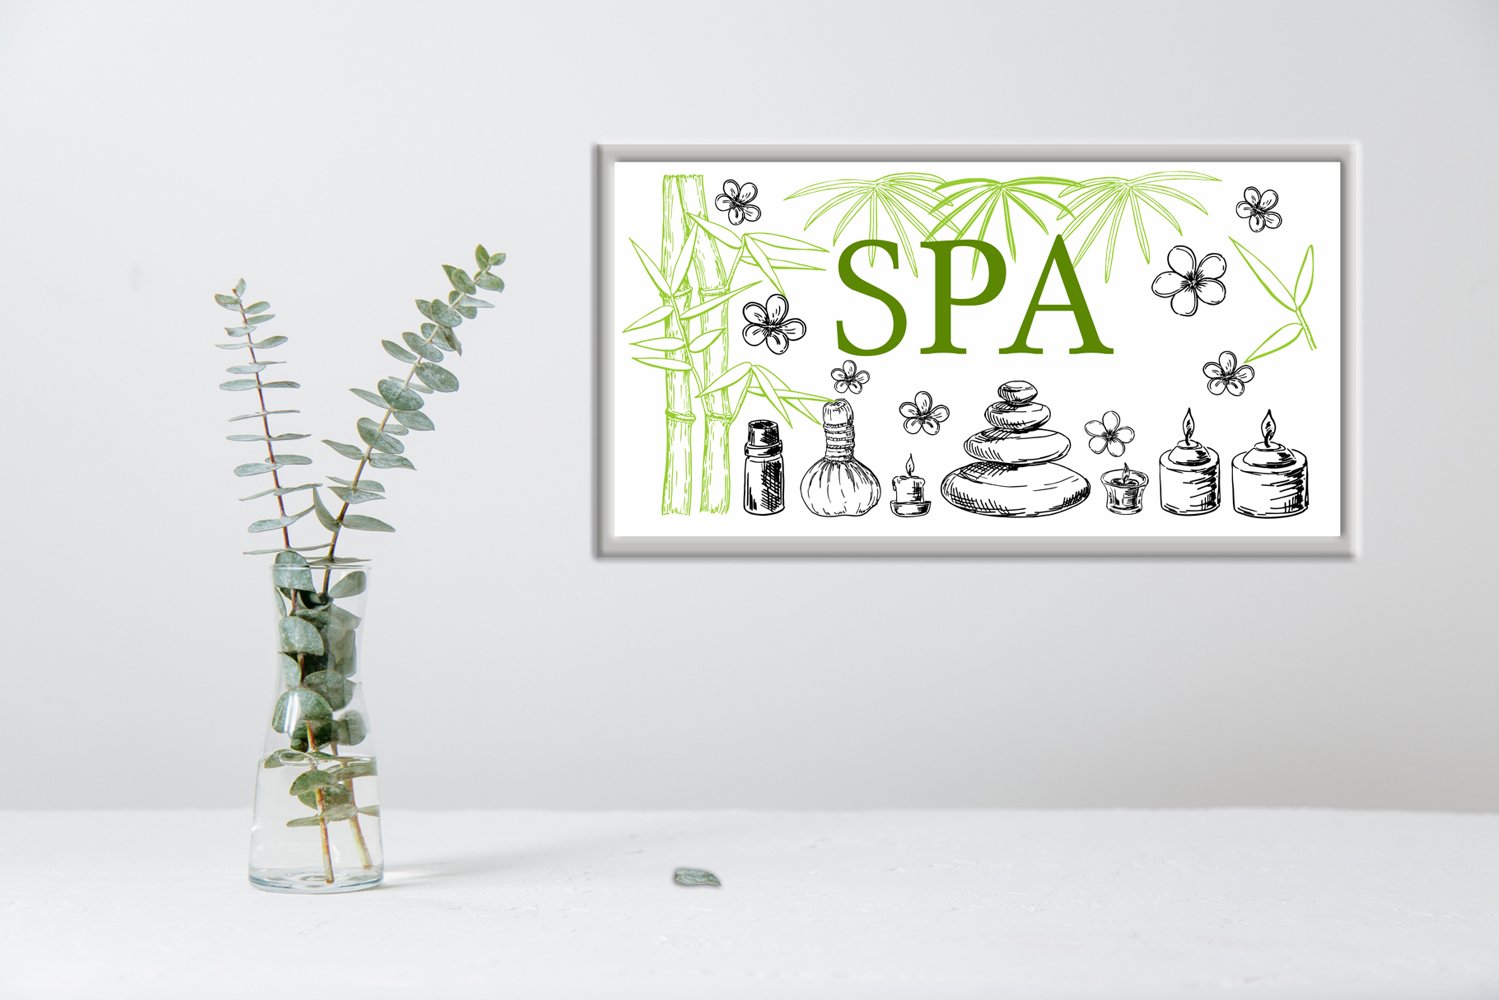 Decorate your spa center.